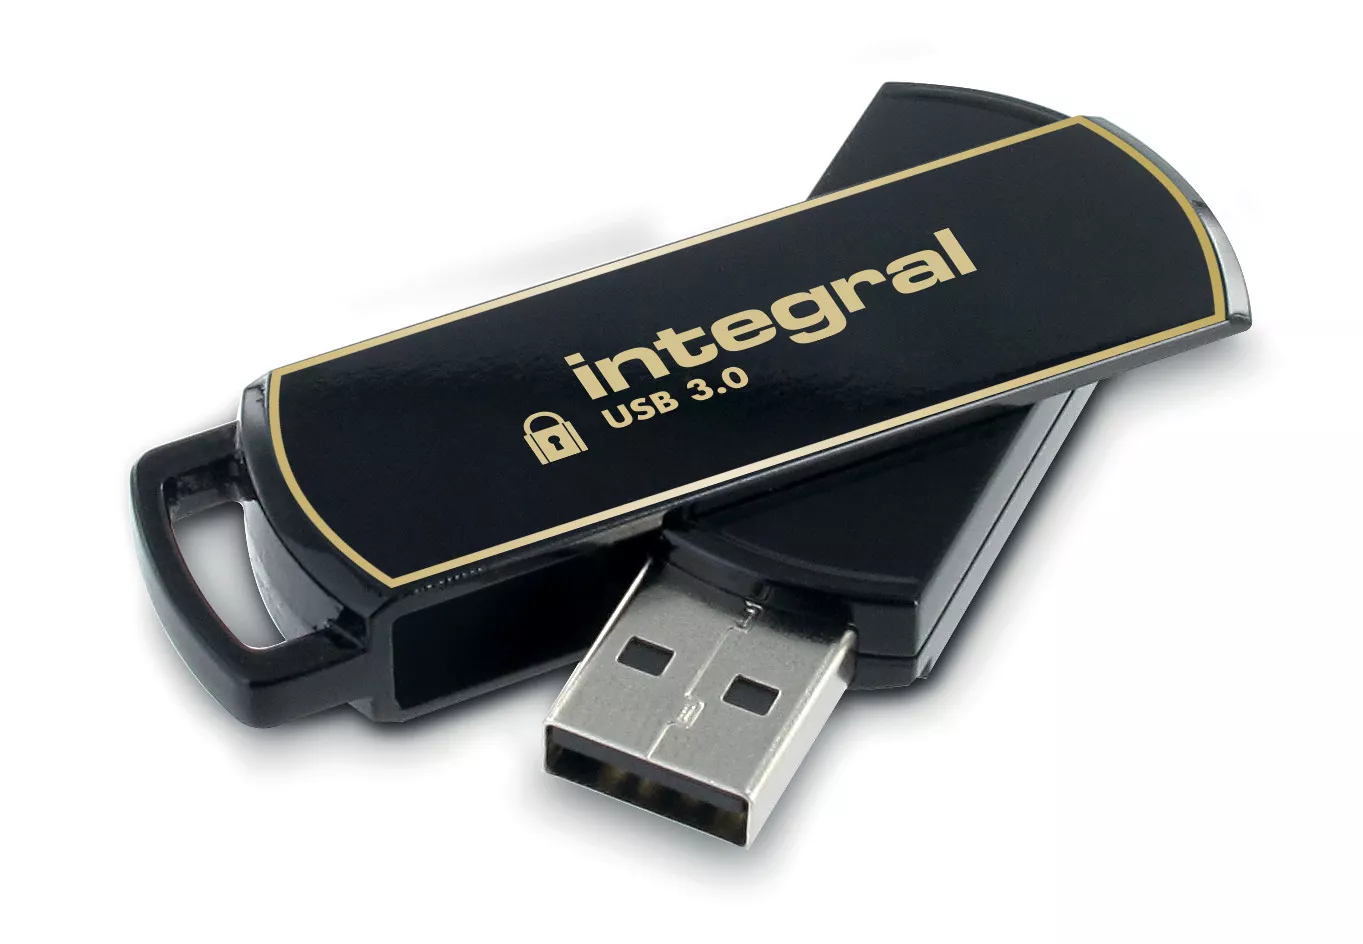 Achat Integral 8GB Crypto Drive FIPS 197 Encrypted USB 3.0 - 5055288430266